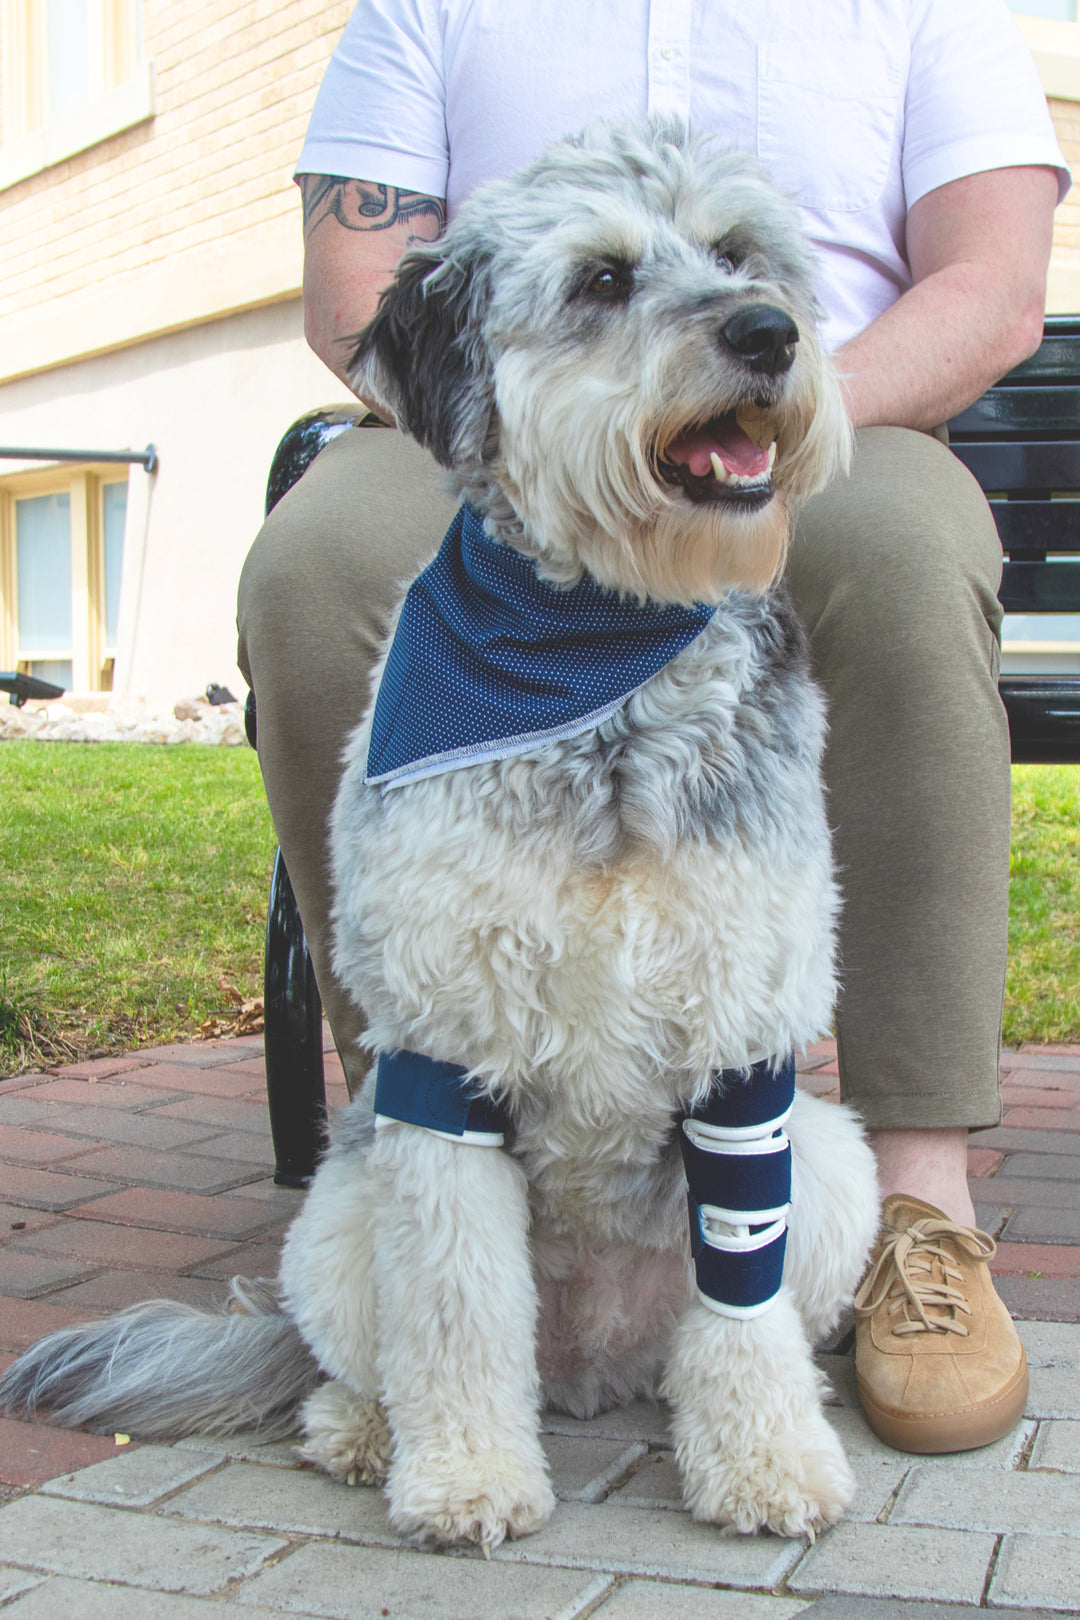 balto soft brace for canine elbow support dog sititng and wearing brace